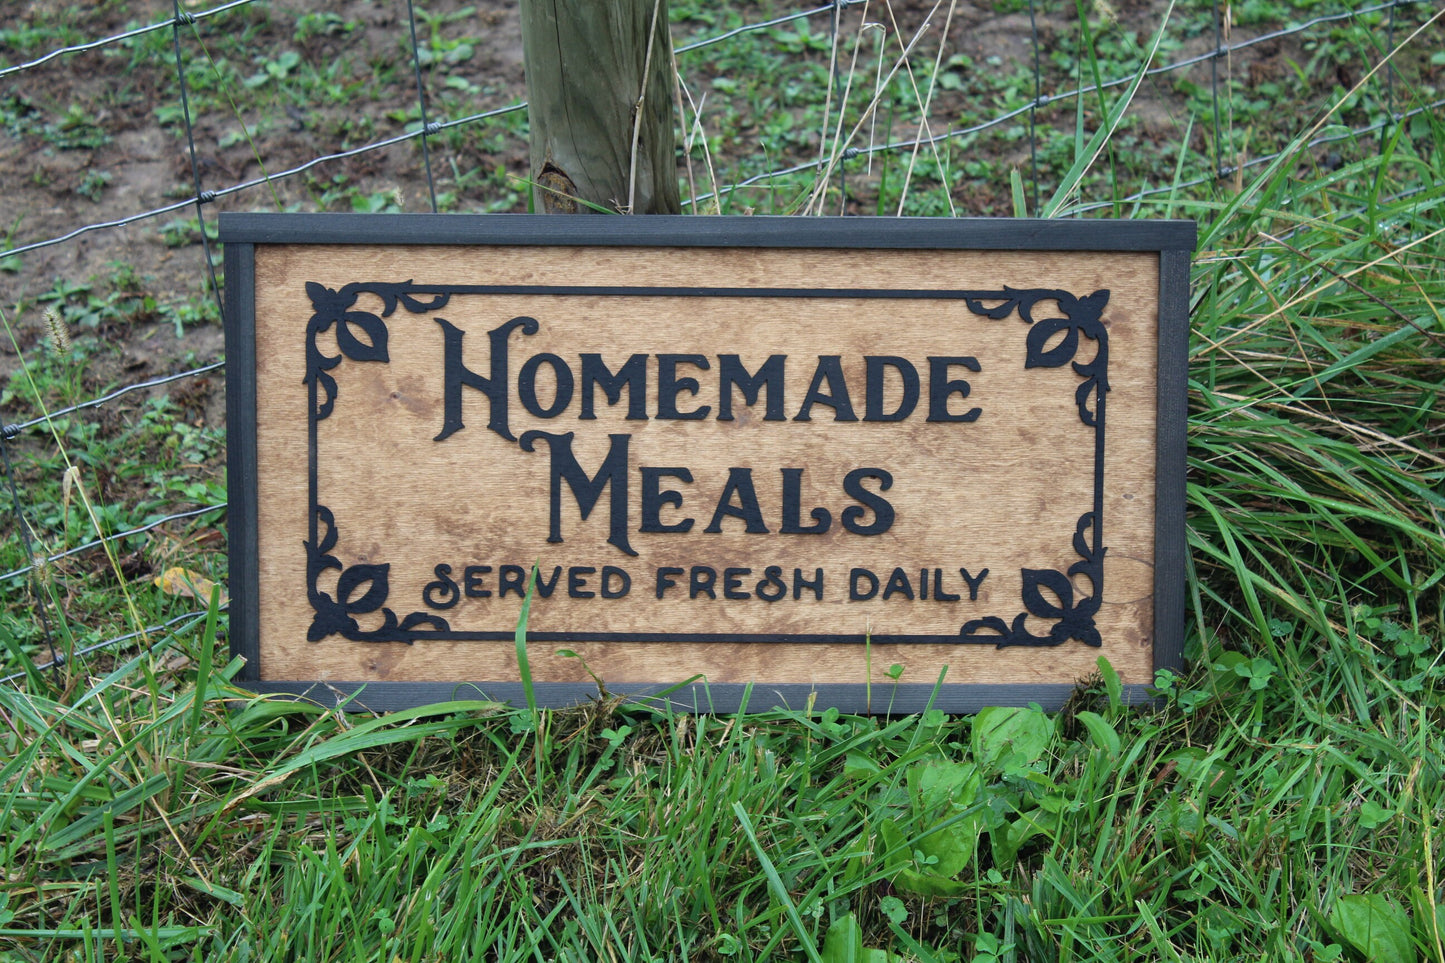 Grandma Mom Aunt Gift Homemade Meals Served Fresh Daily 3D Raised Handmade Wood Sign Decor Kitchen Decor Around The Table Cook With Love